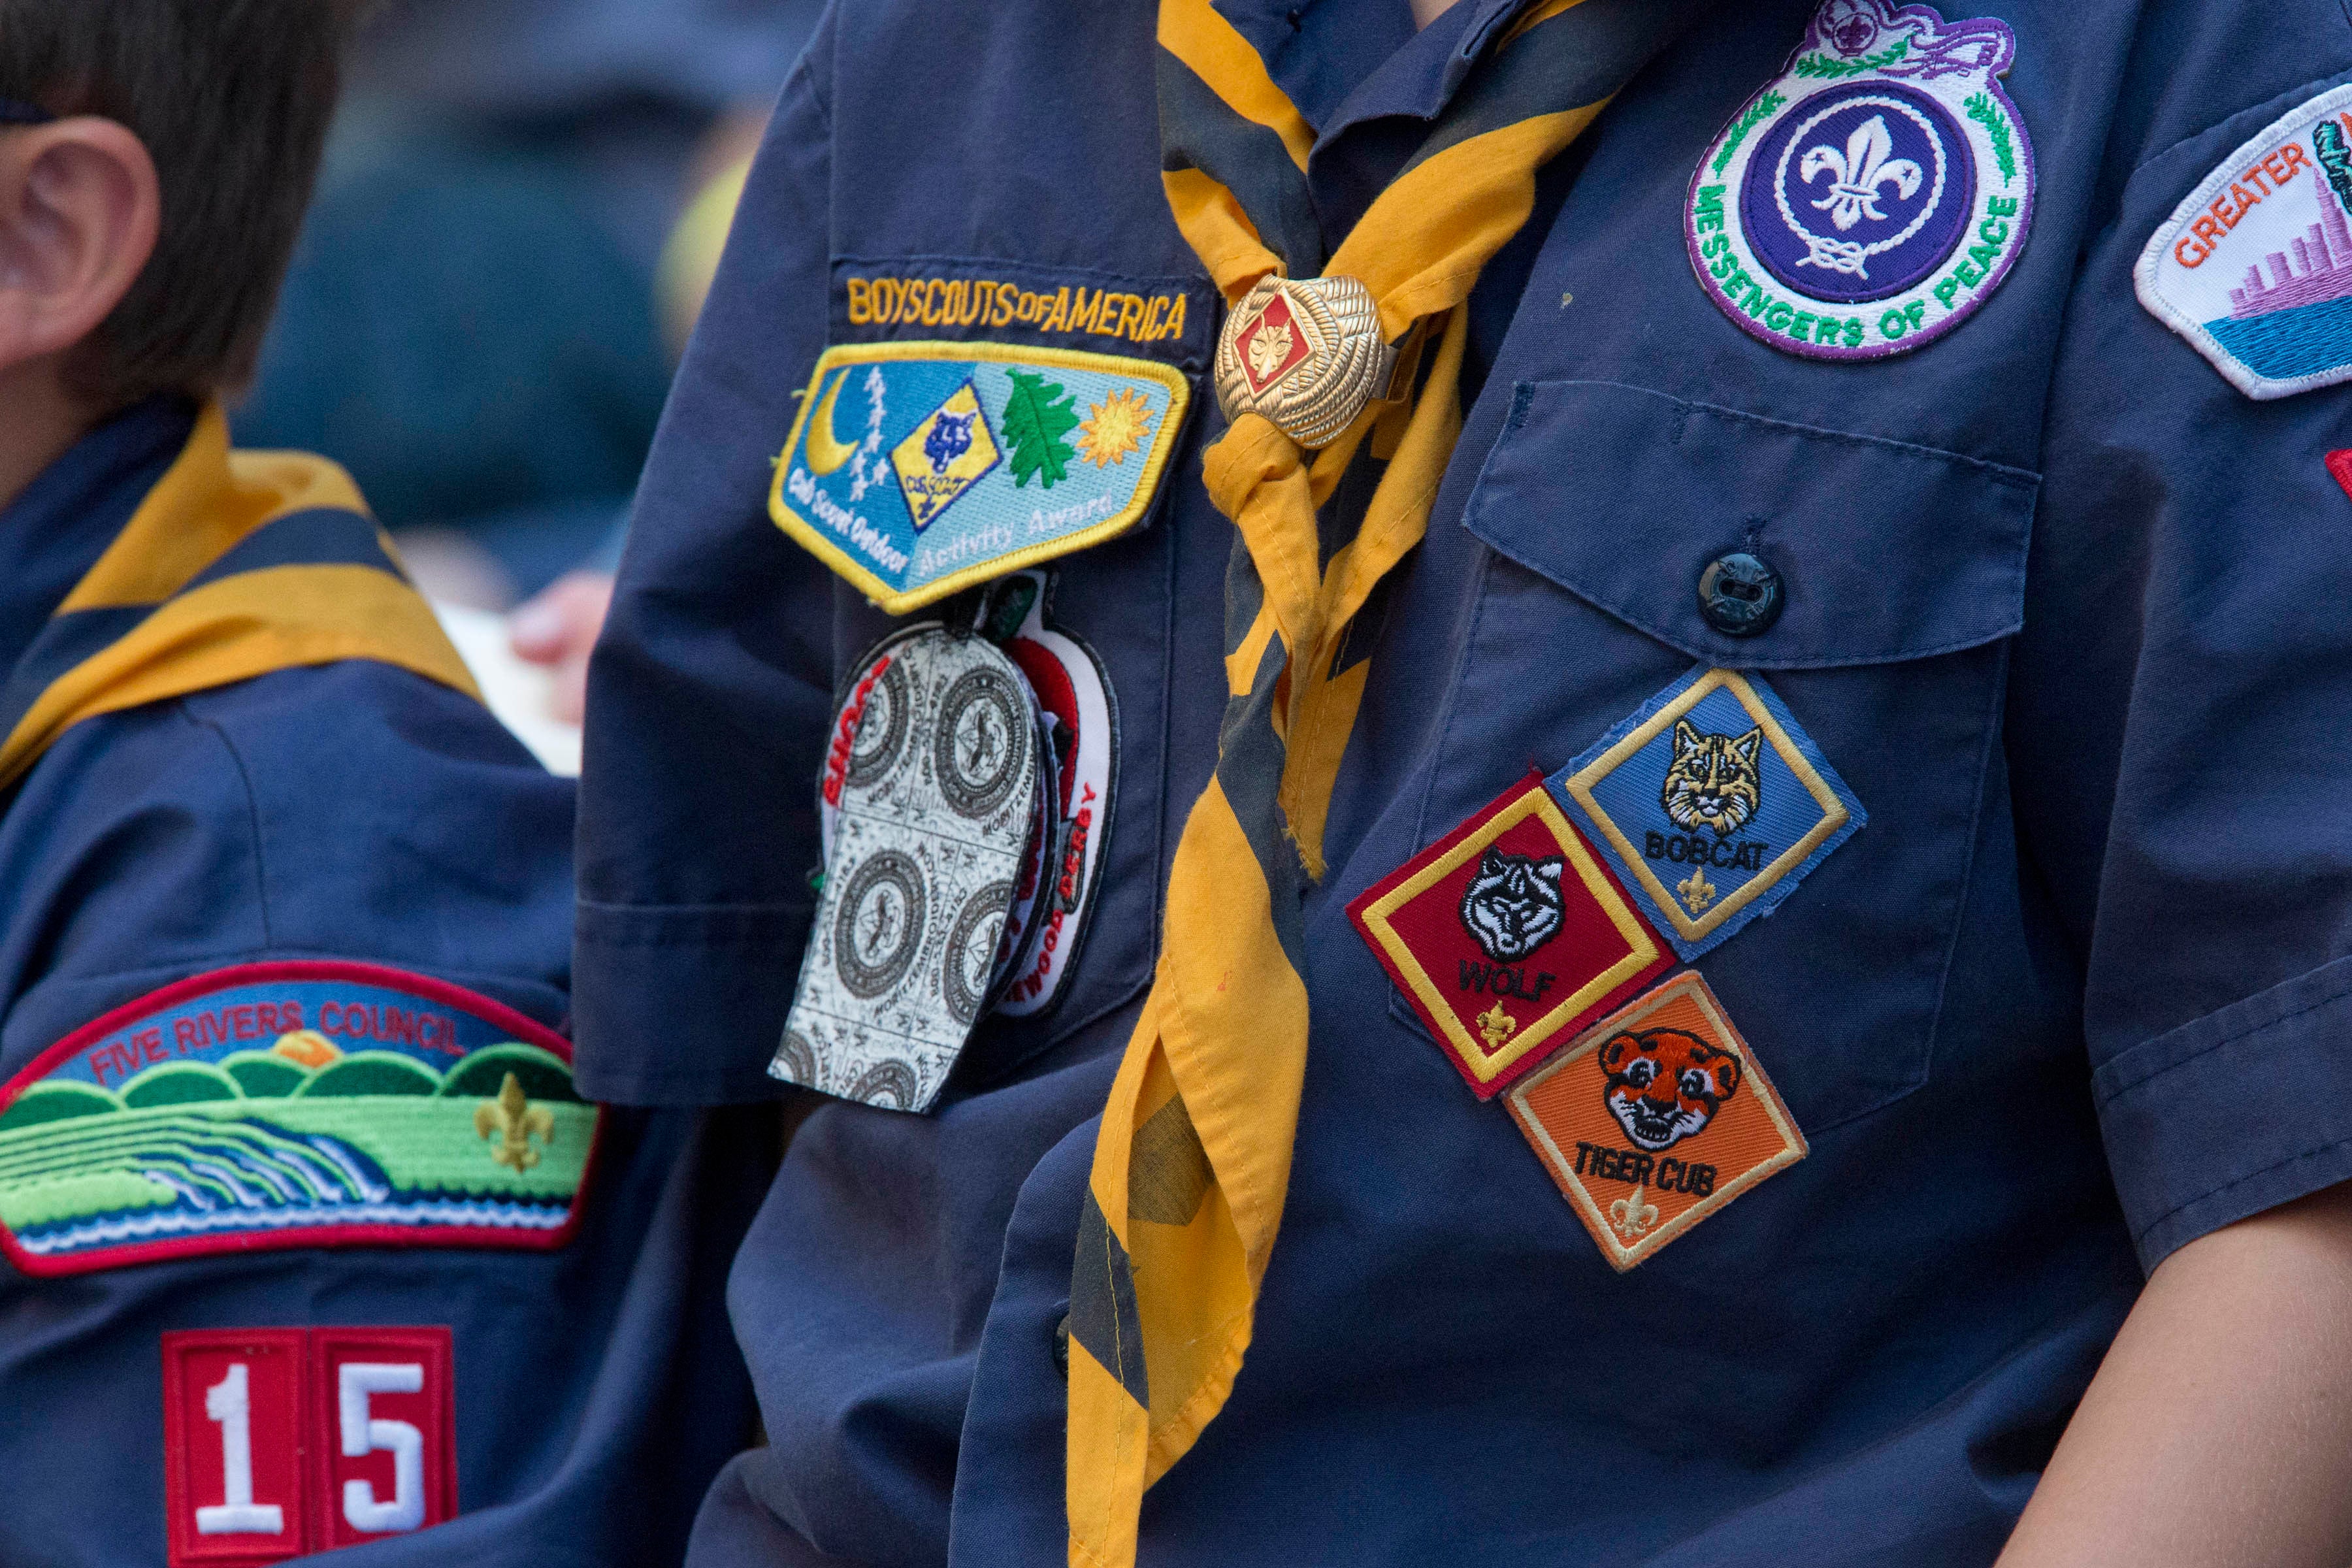 How To Start A Business With scouts